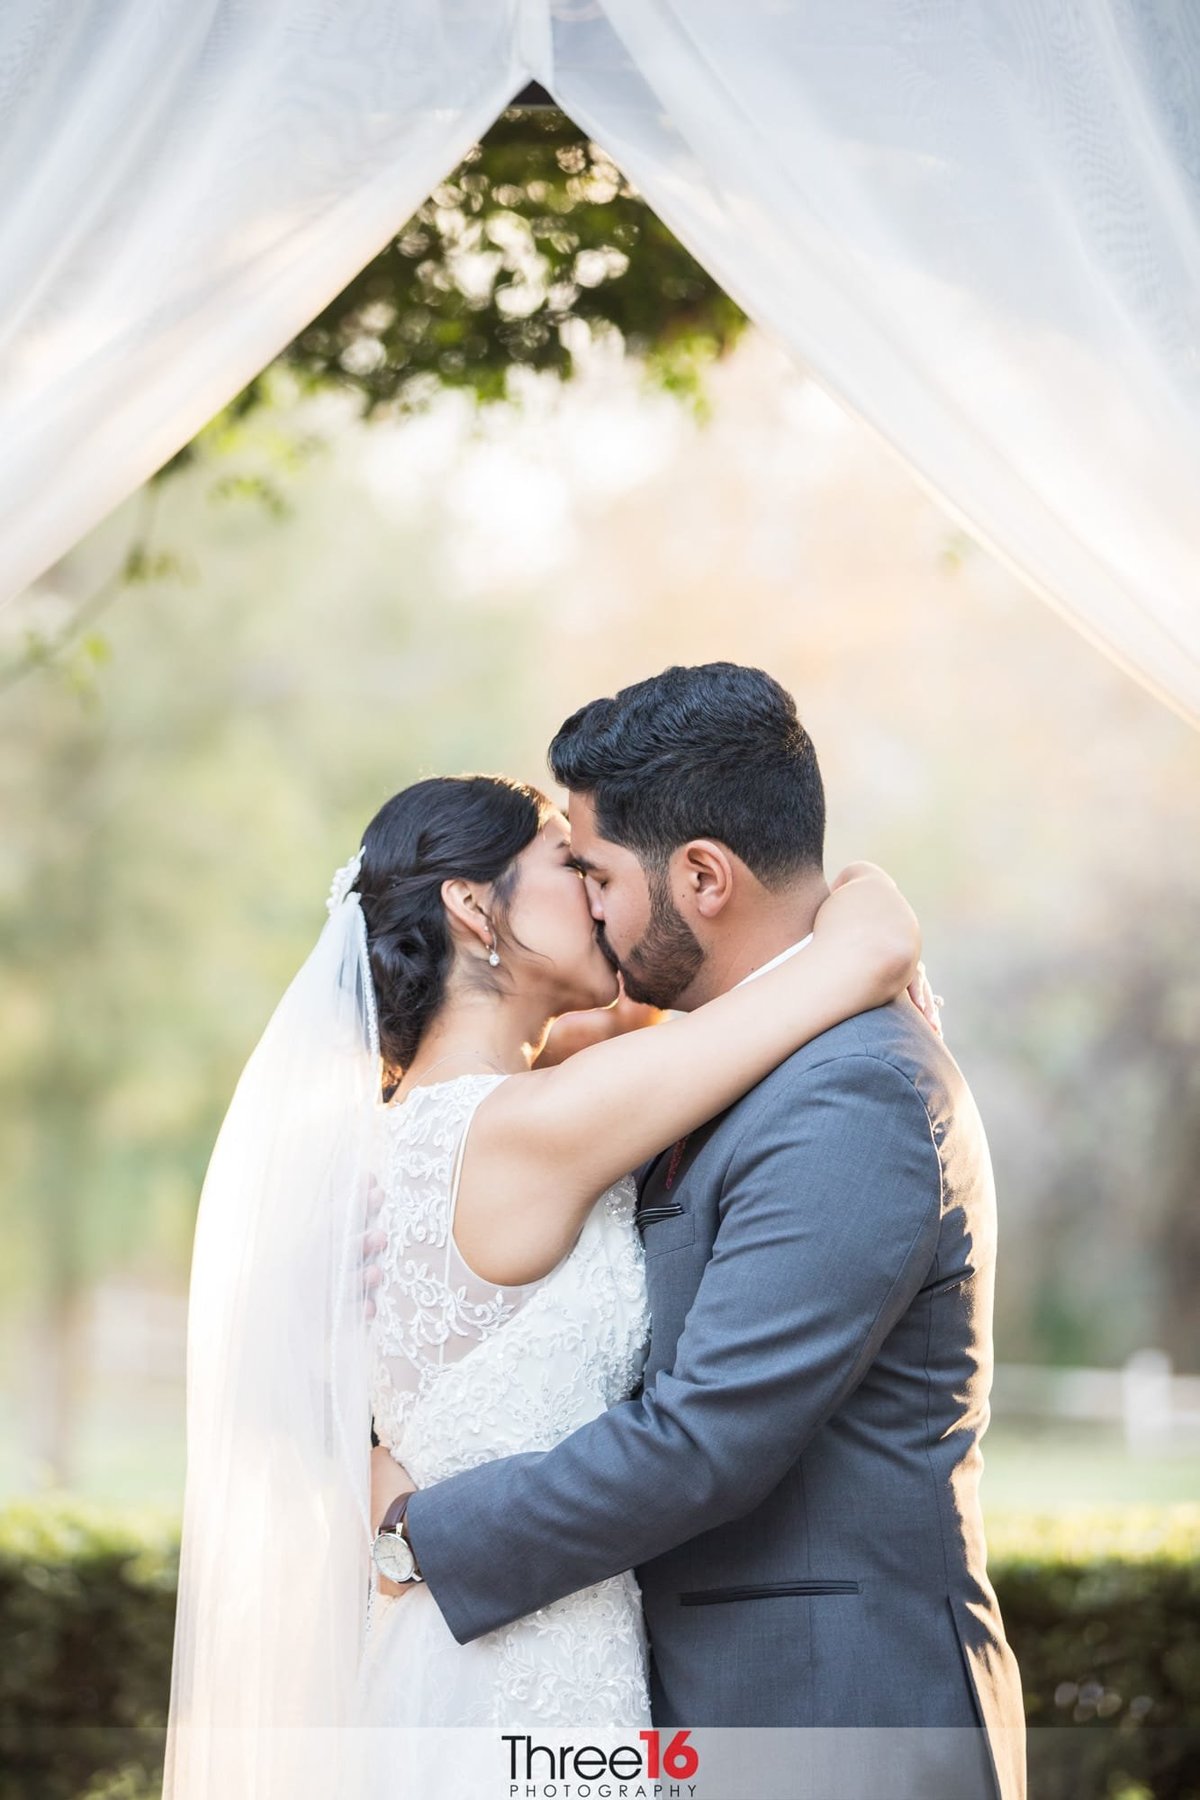 First kiss as Husband and Wife at the altar